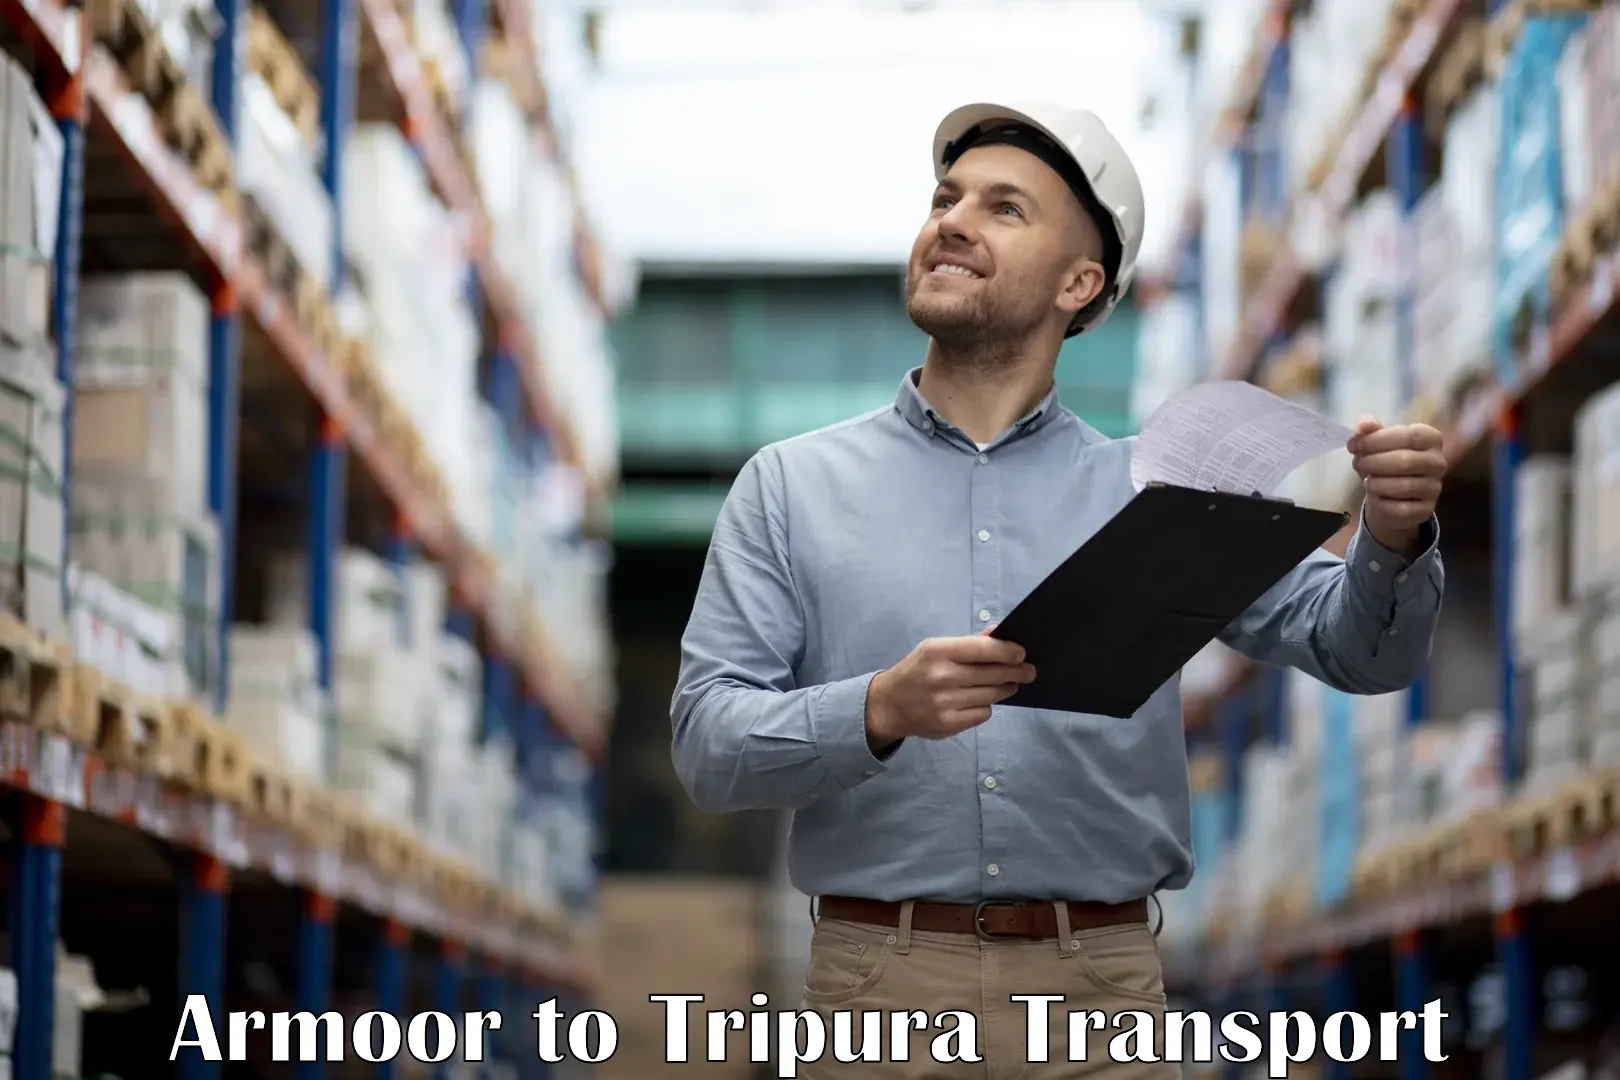 Pick up transport service Armoor to Tripura